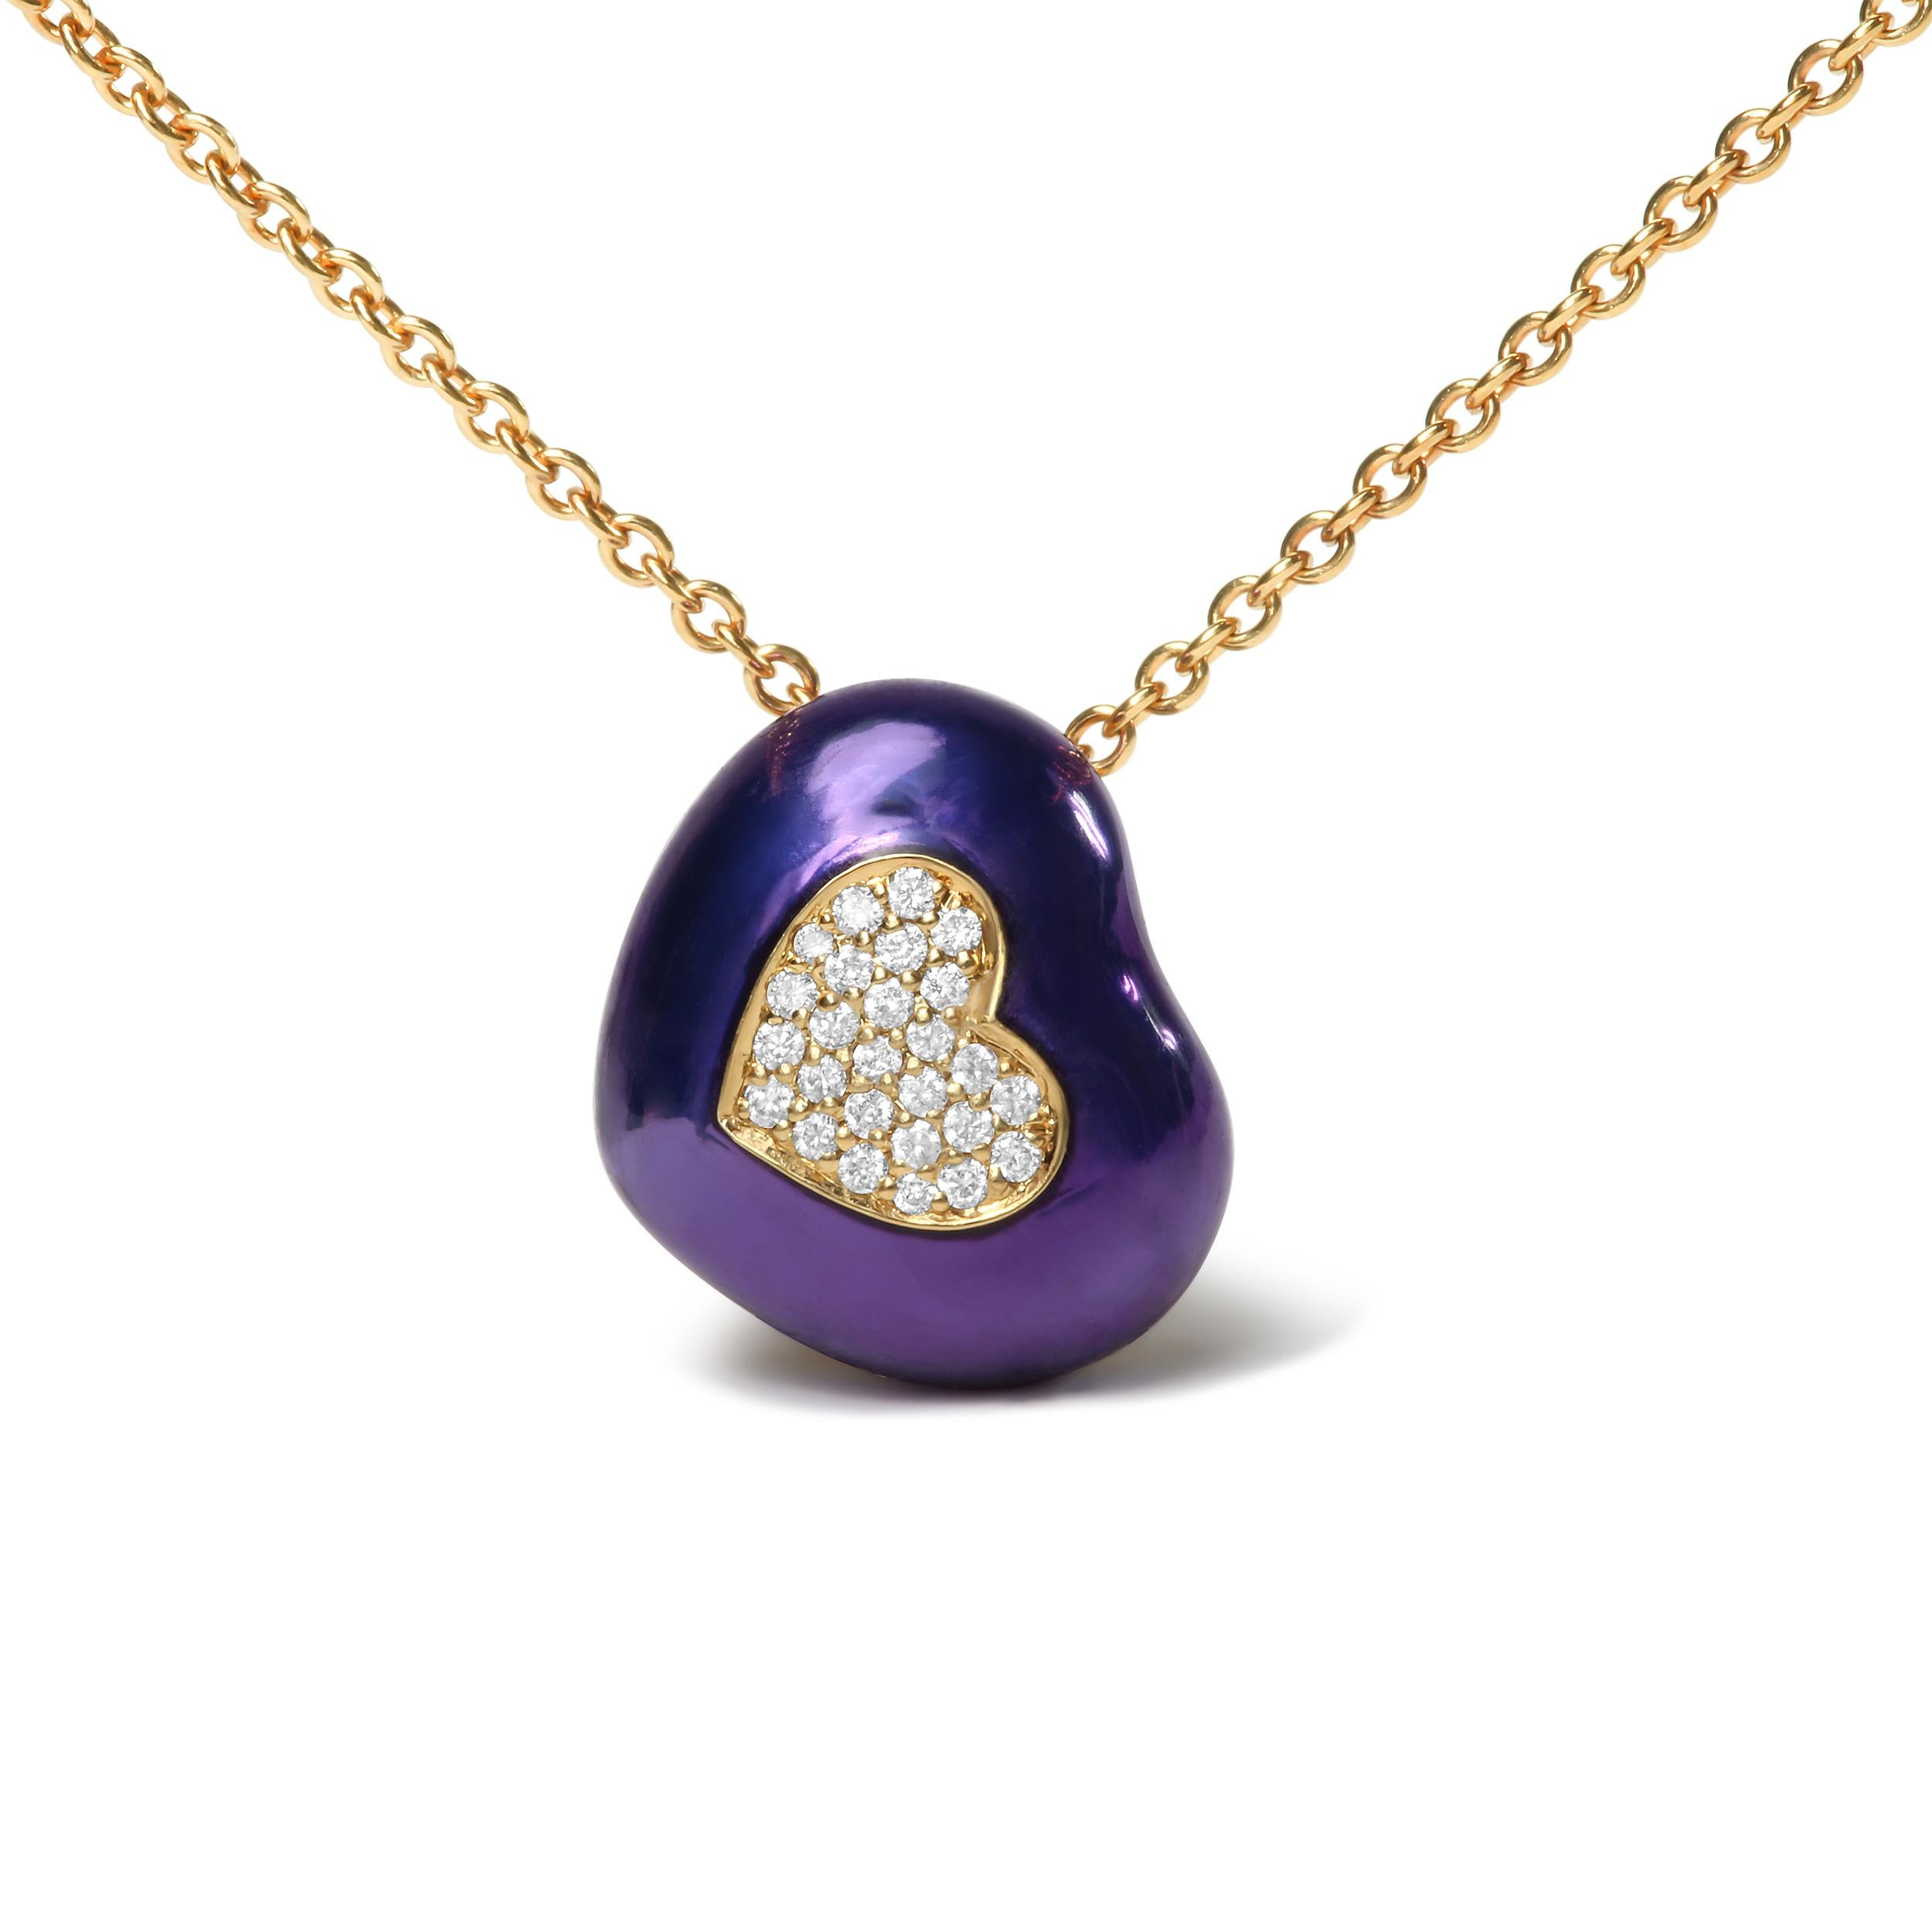 This sweet heart-shaped pendant necklace will set her heart all aflutter, cast in 18k yellow gold with blue enamel. A cluster of round, prong-set diamonds gathers in the shape of a heart at the center of the pendant for a dose of sparkling romance.